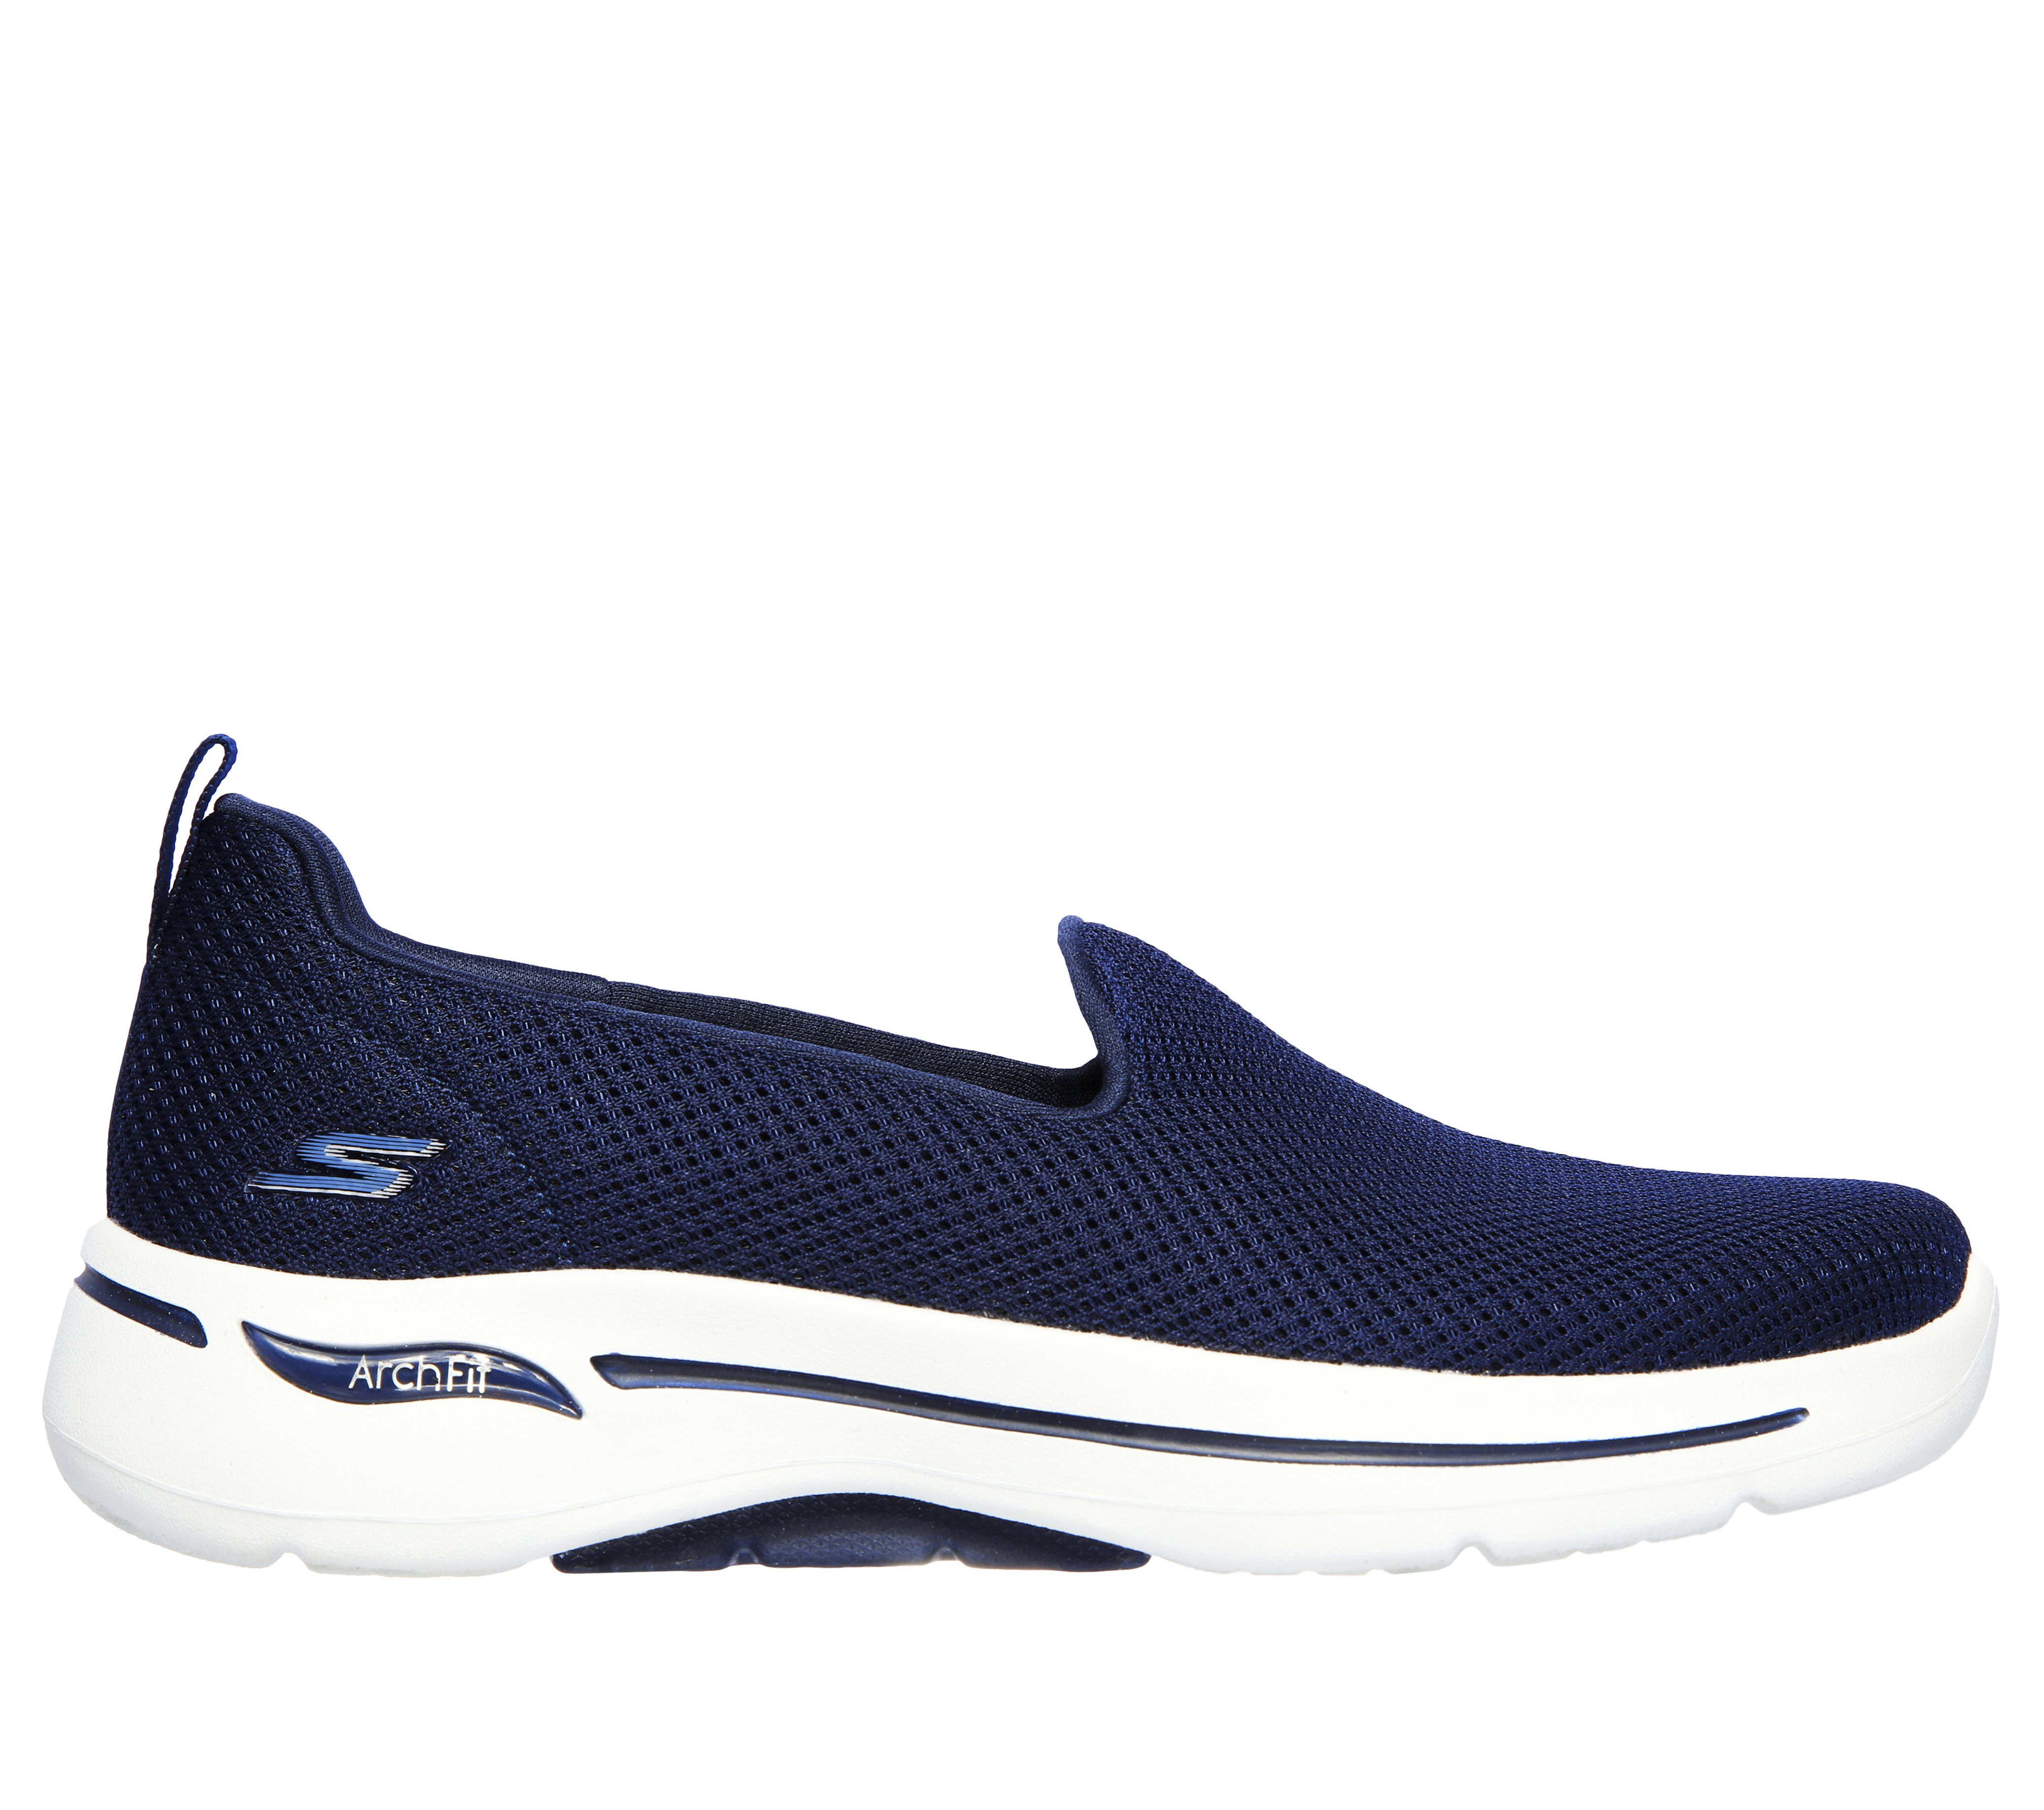 Where to Find Skechers Go Walk Shoes?